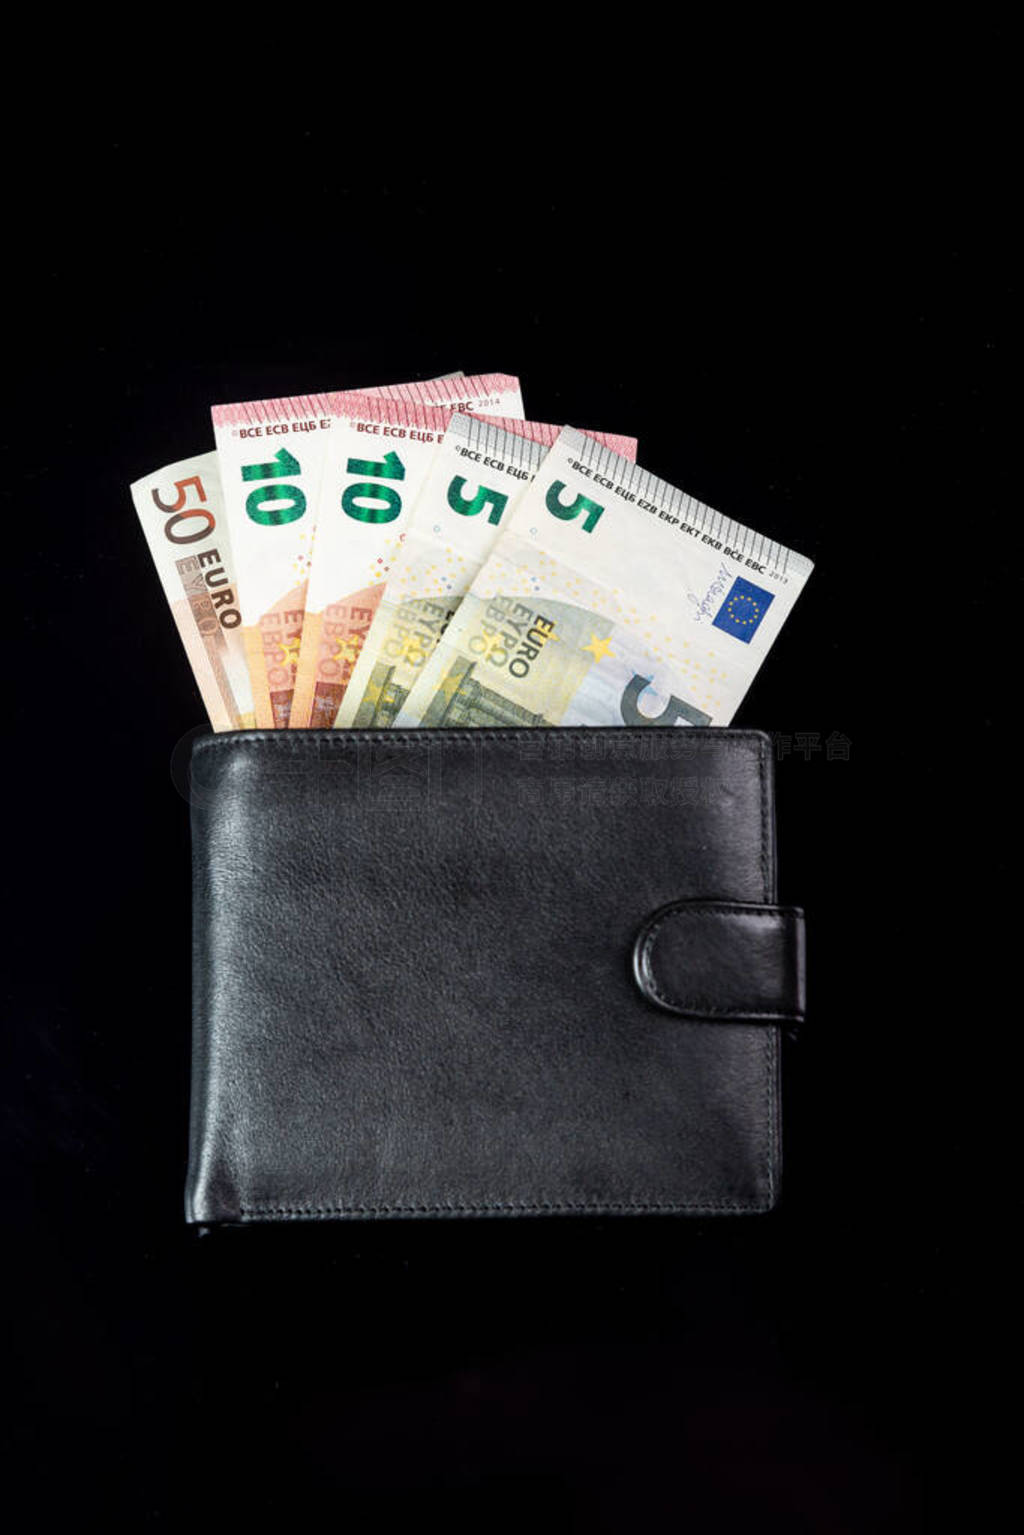 Money euro notes stick out from a black wallet on a black backgr